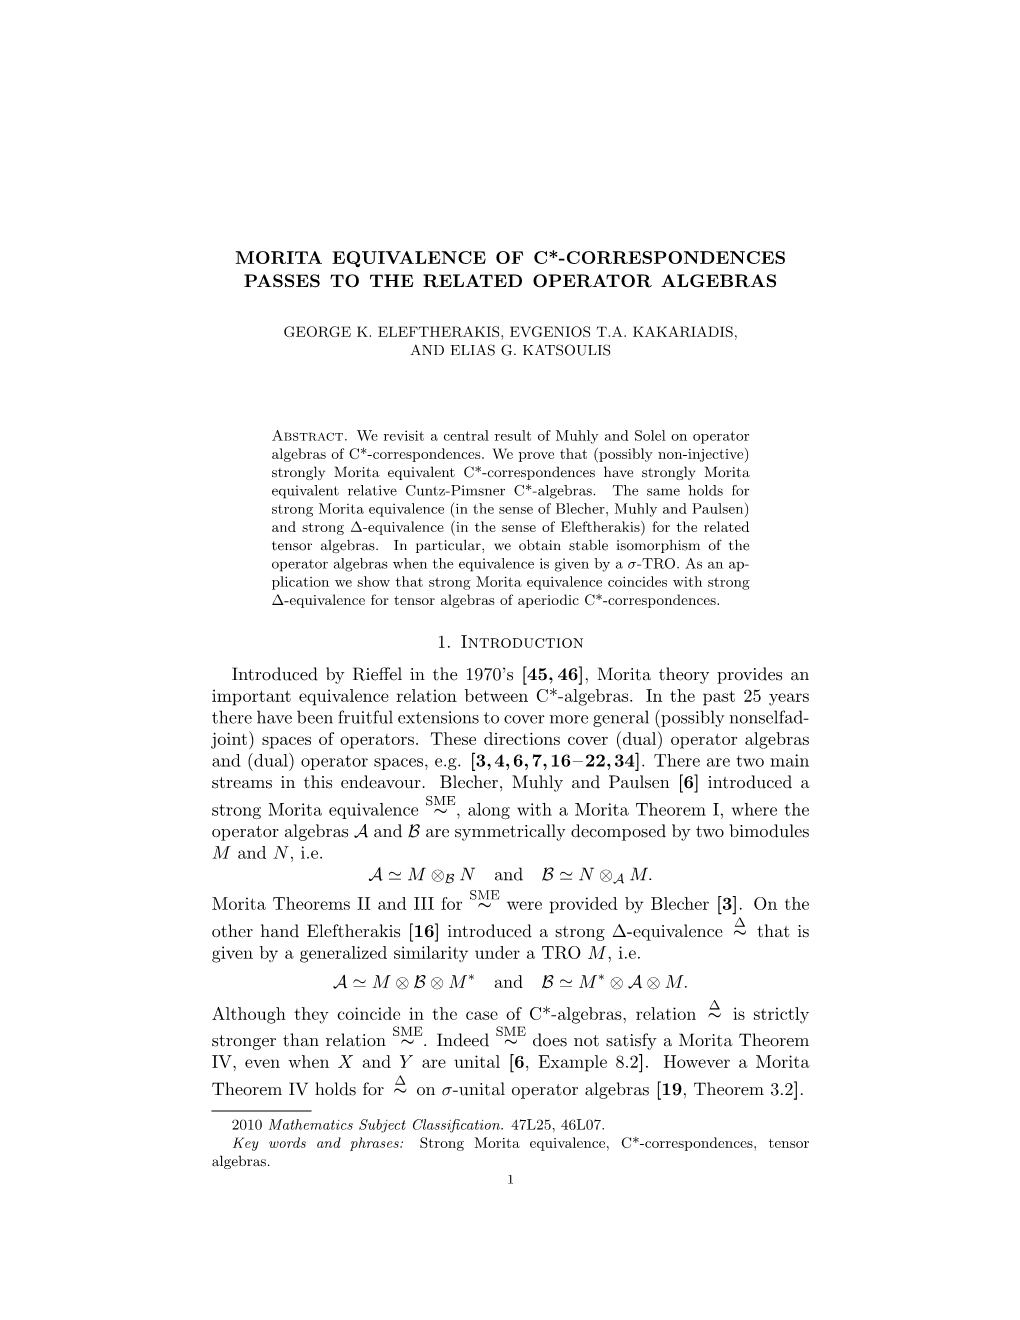 MORITA EQUIVALENCE of C*-CORRESPONDENCES PASSES to the RELATED OPERATOR ALGEBRAS 1. Introduction Introduced by Rieffel in the 19